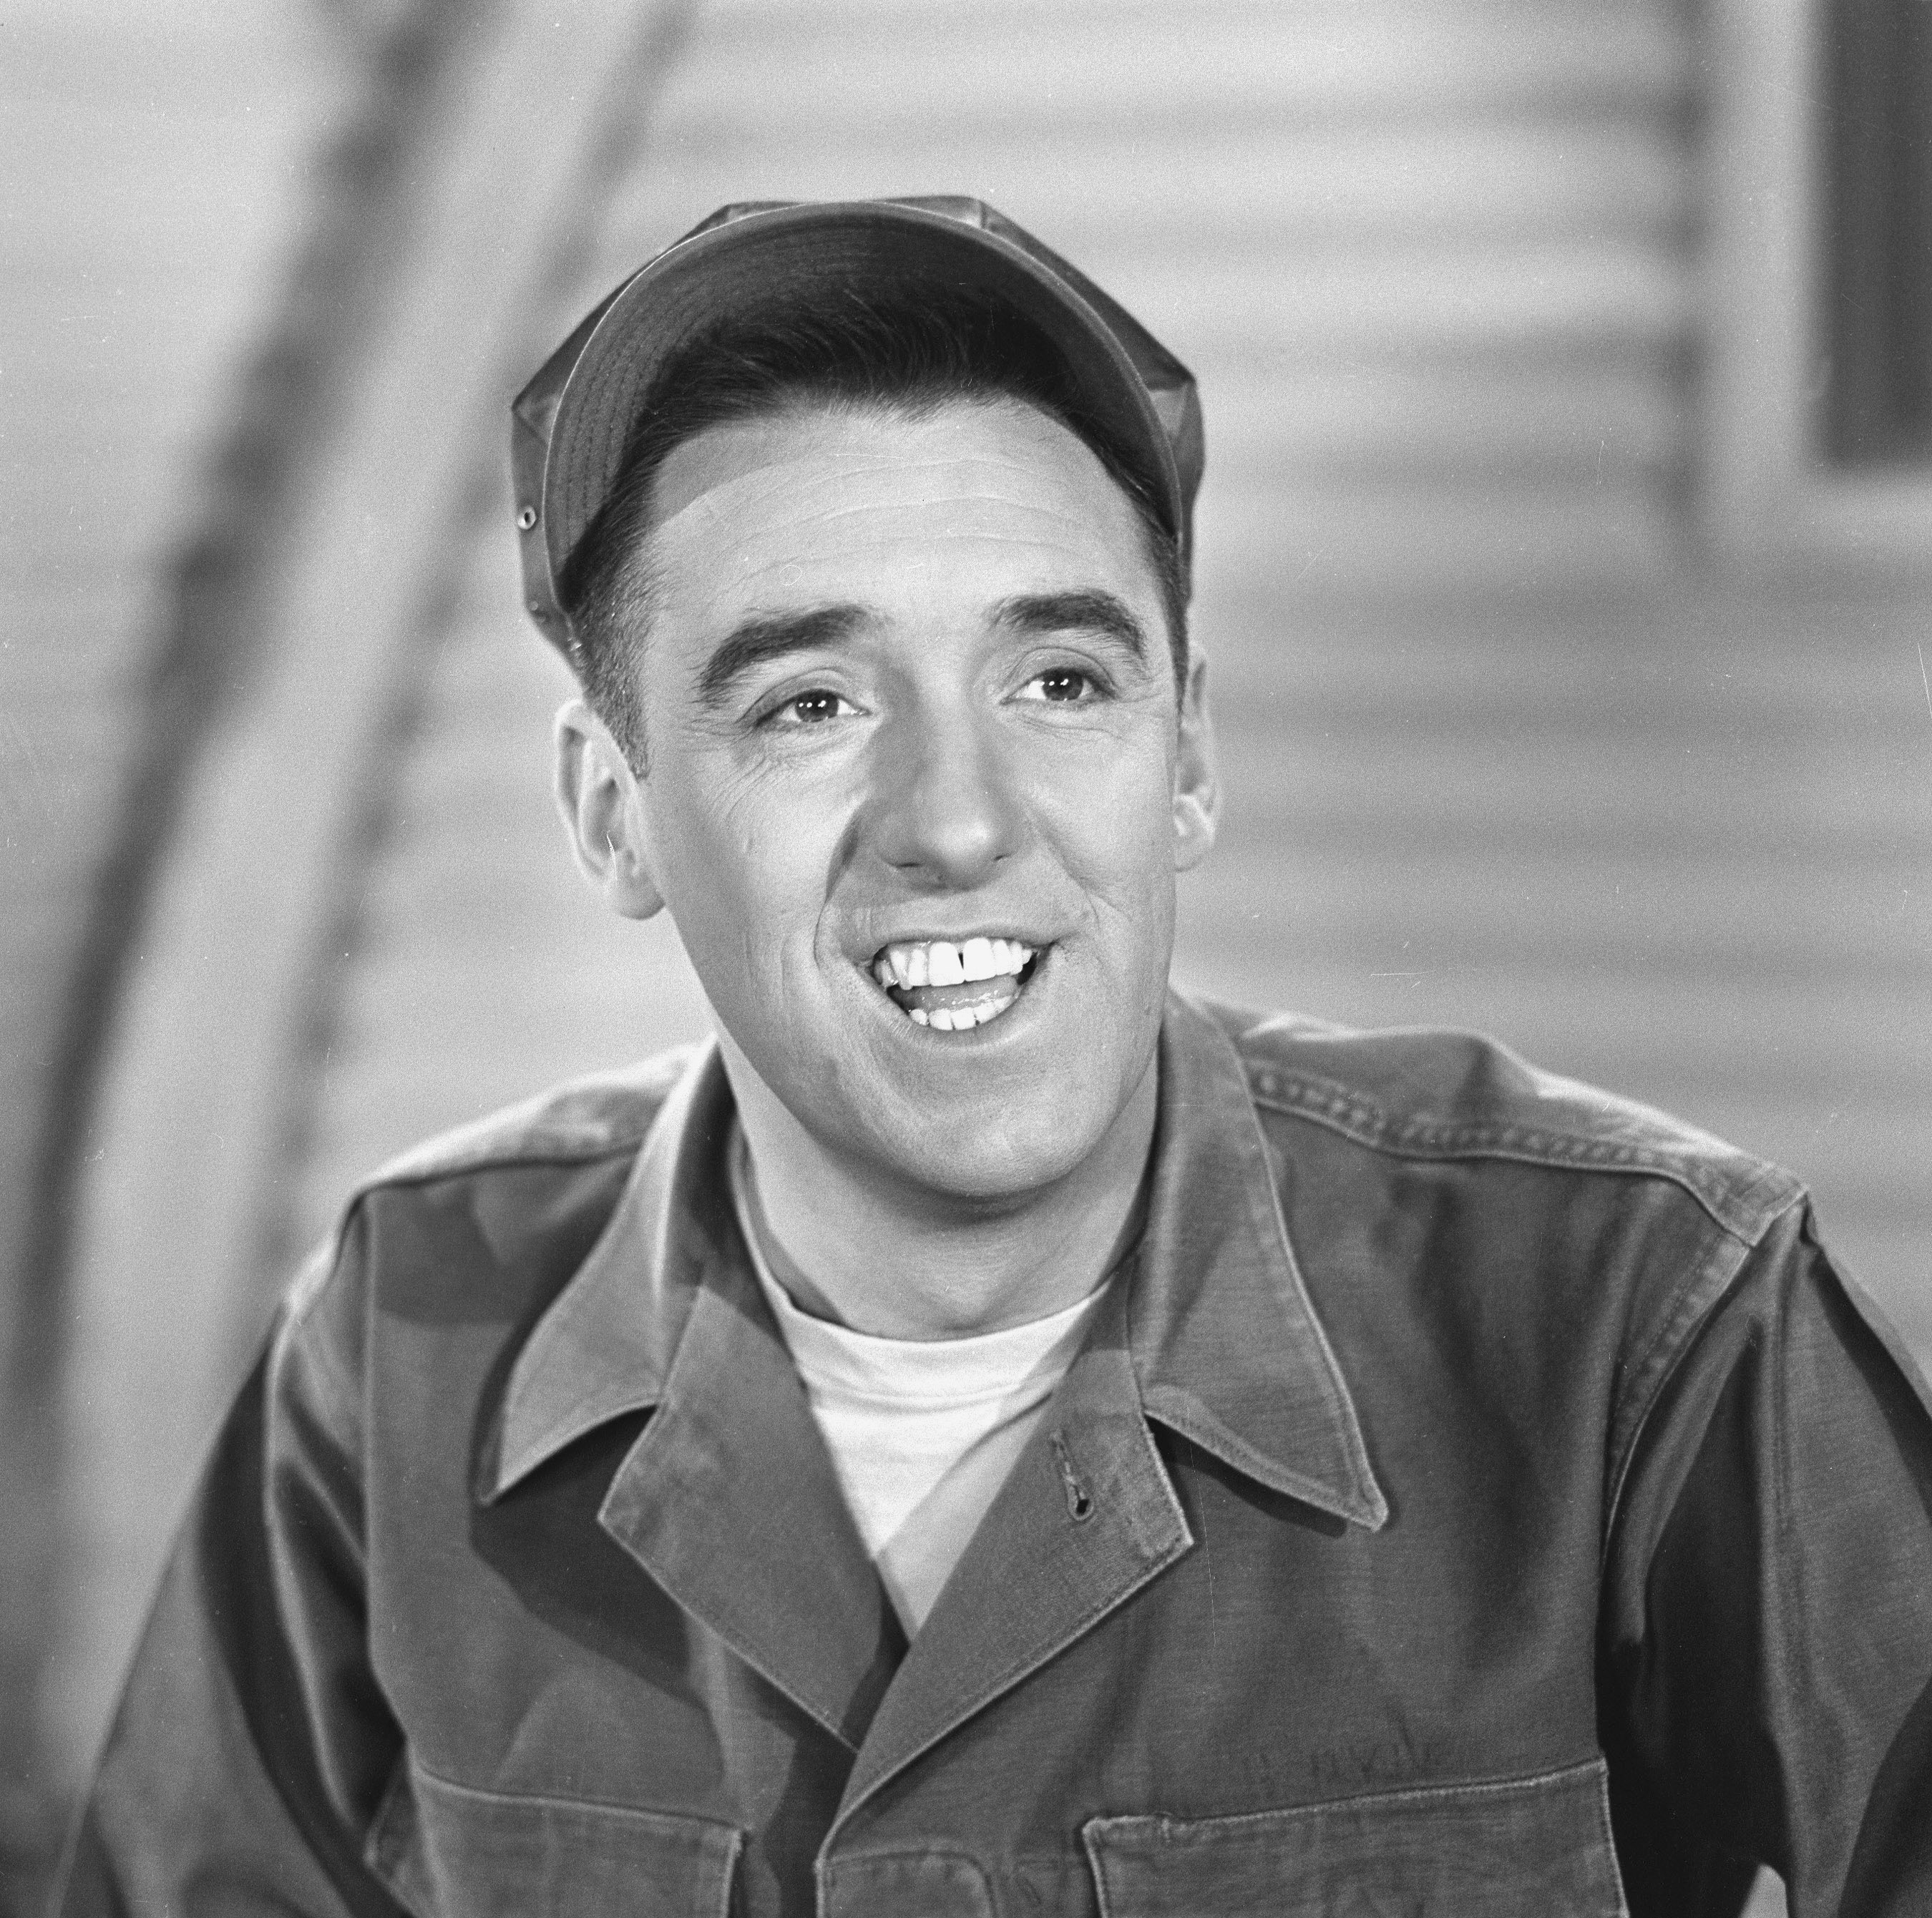 An ‘Andy Griffith Show’ Director Said Gomer Pyle Actor Jim Nabors Was a ‘Complete Jekyll and Hyde’